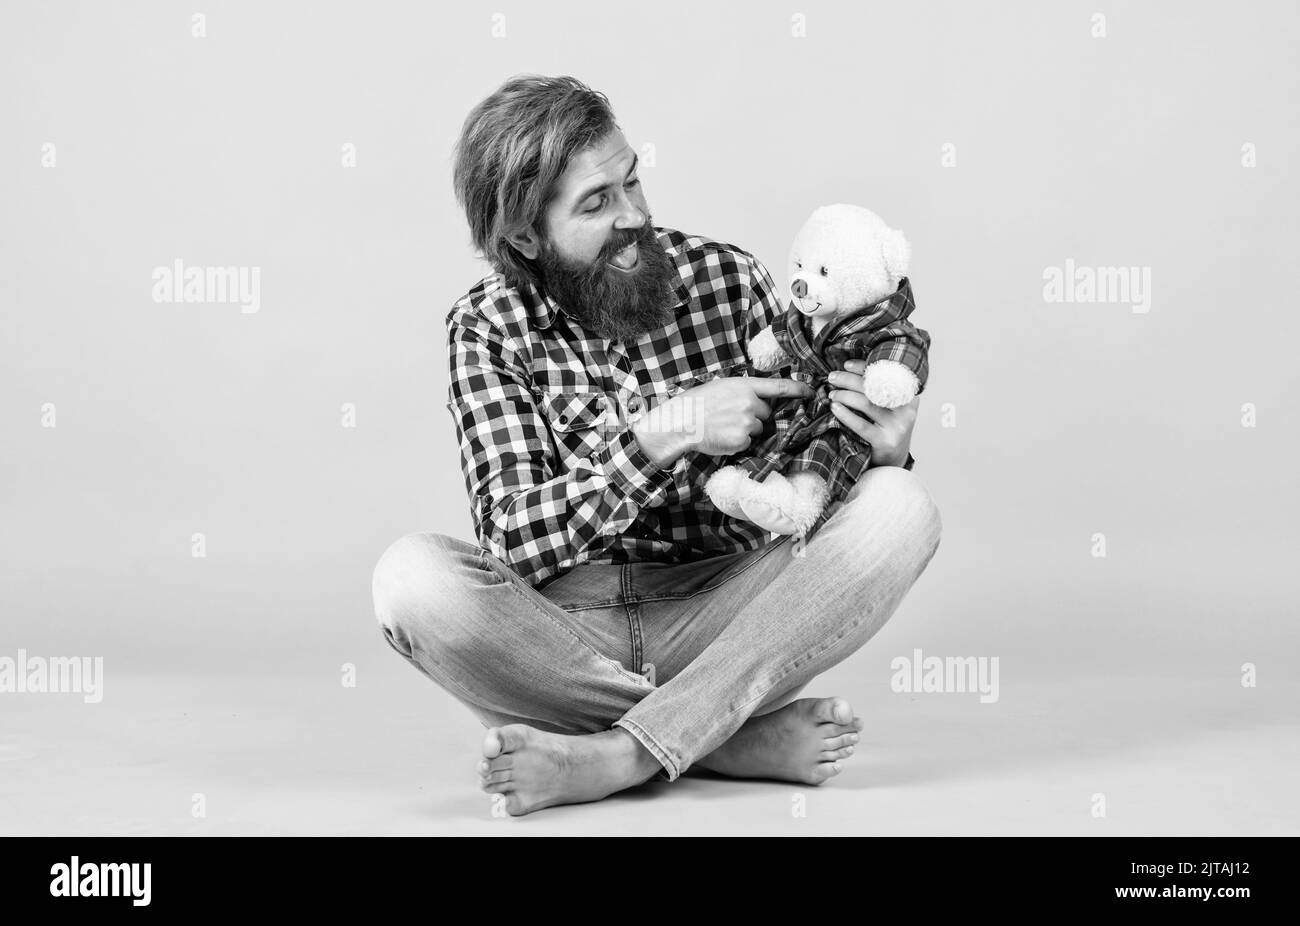 brutal bearded man wear checkered shirt having lush beard and moustache with teddy bear toy, valentines day Stock Photo